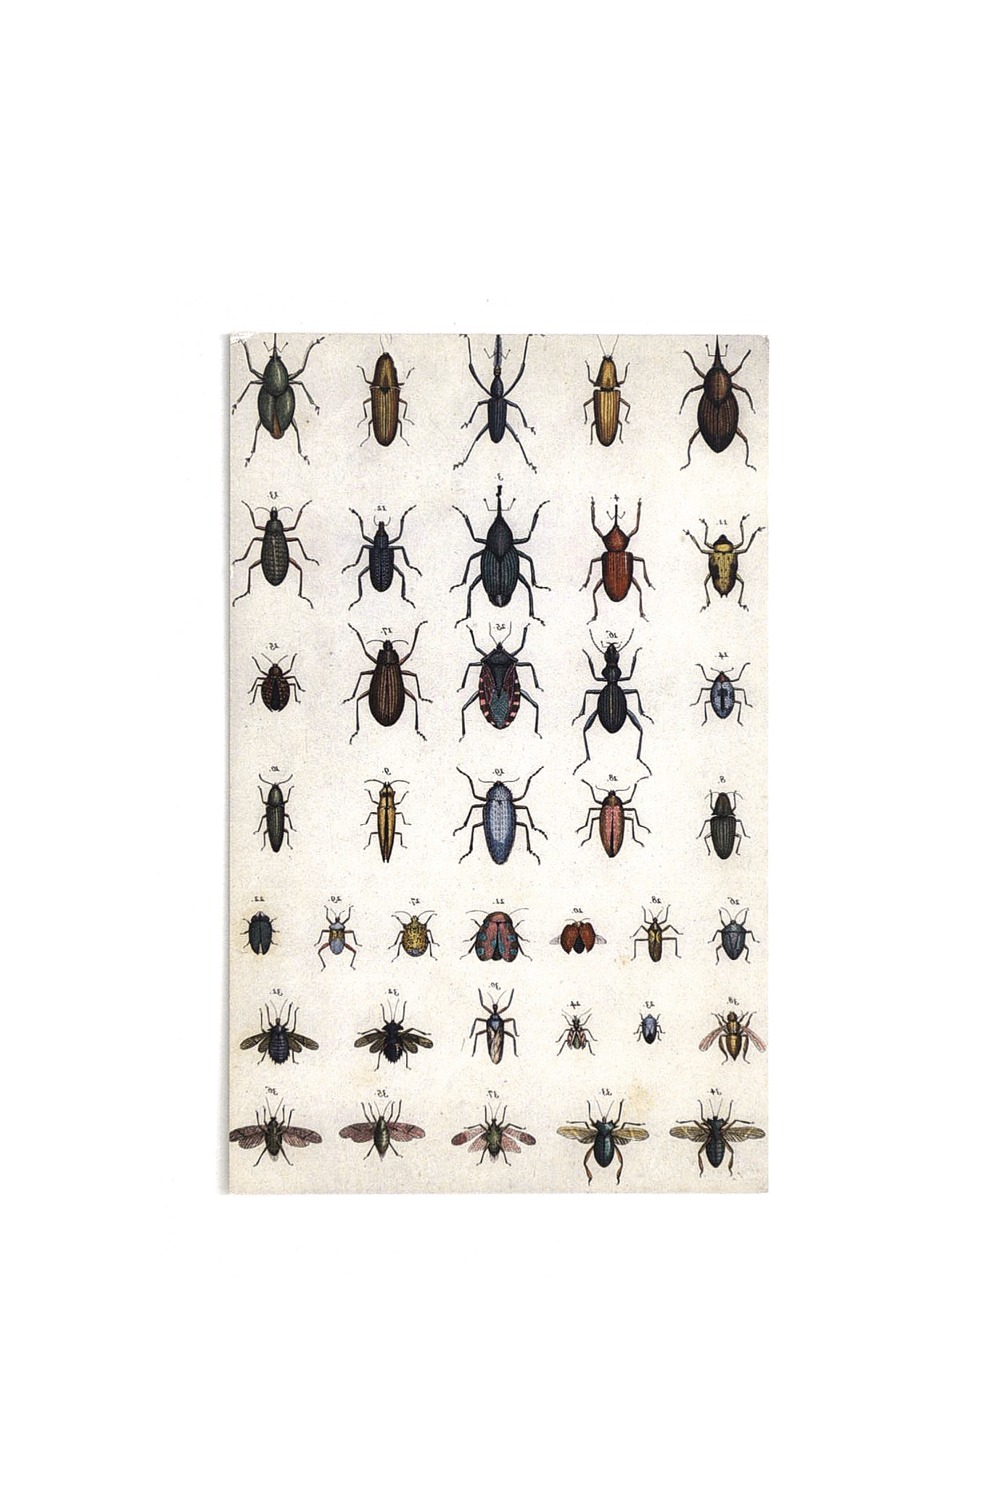 PostCard - Insects